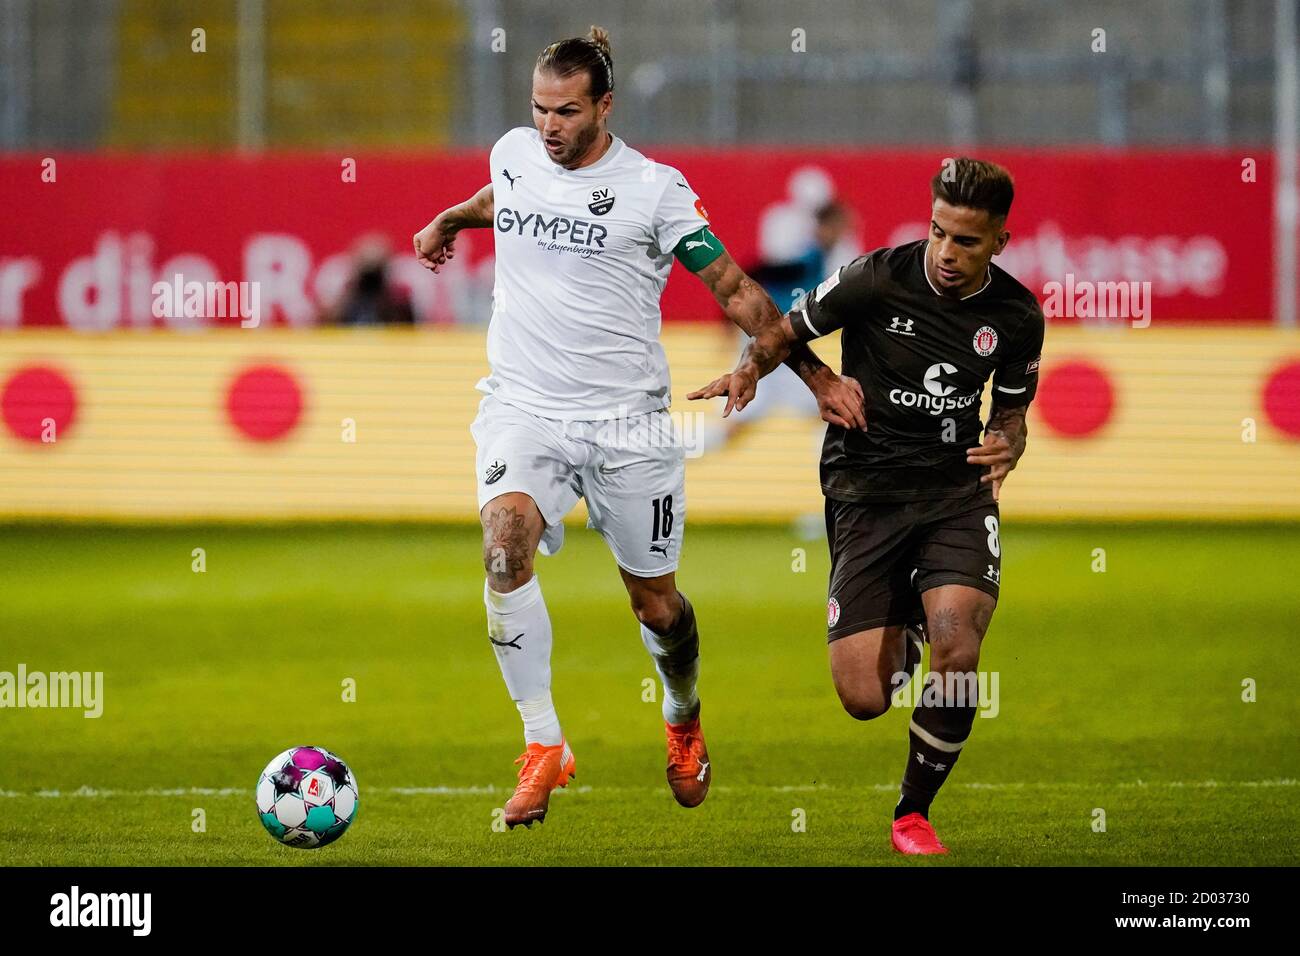 Sandhausen, Germany. 02nd Oct, 2020. Football: 2nd Bundesliga, SV Sandhausen - FC St. Pauli, 3rd matchday, Hardtwaldstadion. Sandhausens Dennis Diekmeier (l) and St. Paulis Rodrigo Zalazar fight for the ball. Credit: Uwe Anspach/dpa - IMPORTANT NOTE: In accordance with the regulations of the DFL Deutsche Fußball Liga and the DFB Deutscher Fußball-Bund, it is prohibited to exploit or have exploited in the stadium and/or from the game taken photographs in the form of sequence images and/or video-like photo series./dpa/Alamy Live News Stock Photo